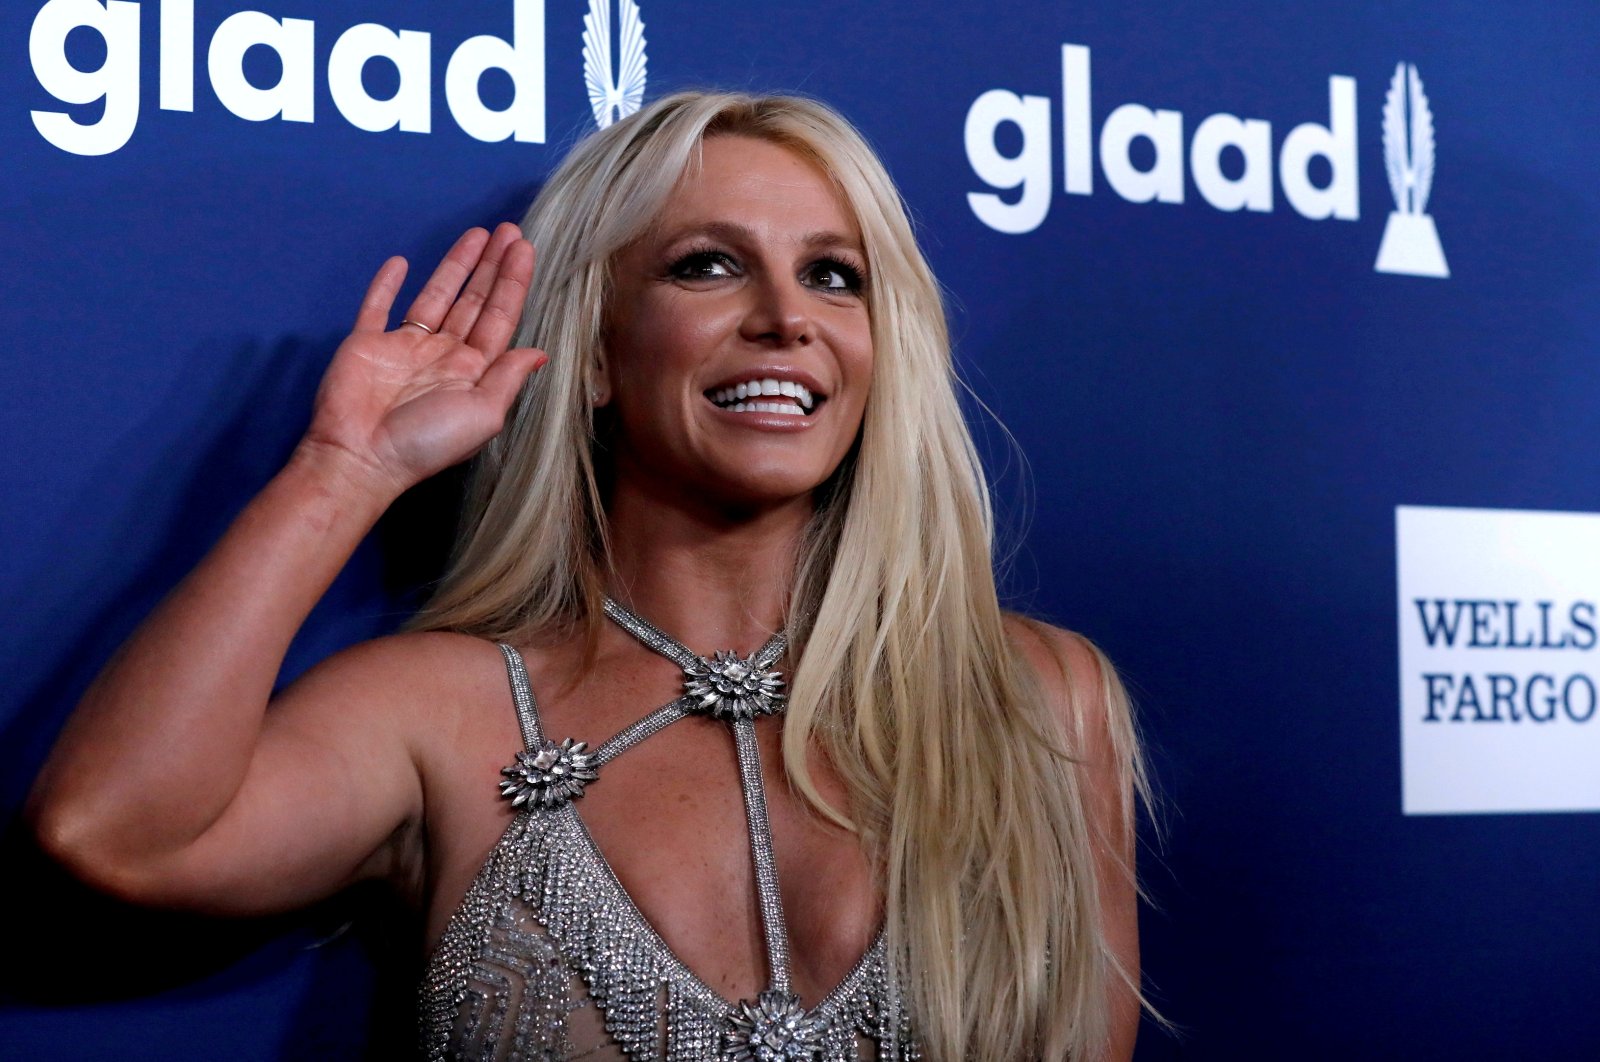 Singer Britney Spears poses at the 29th Annual GLAAD Media Awards in Beverly Hills, California, U.S., April 12, 2018. (Reuters Photo)